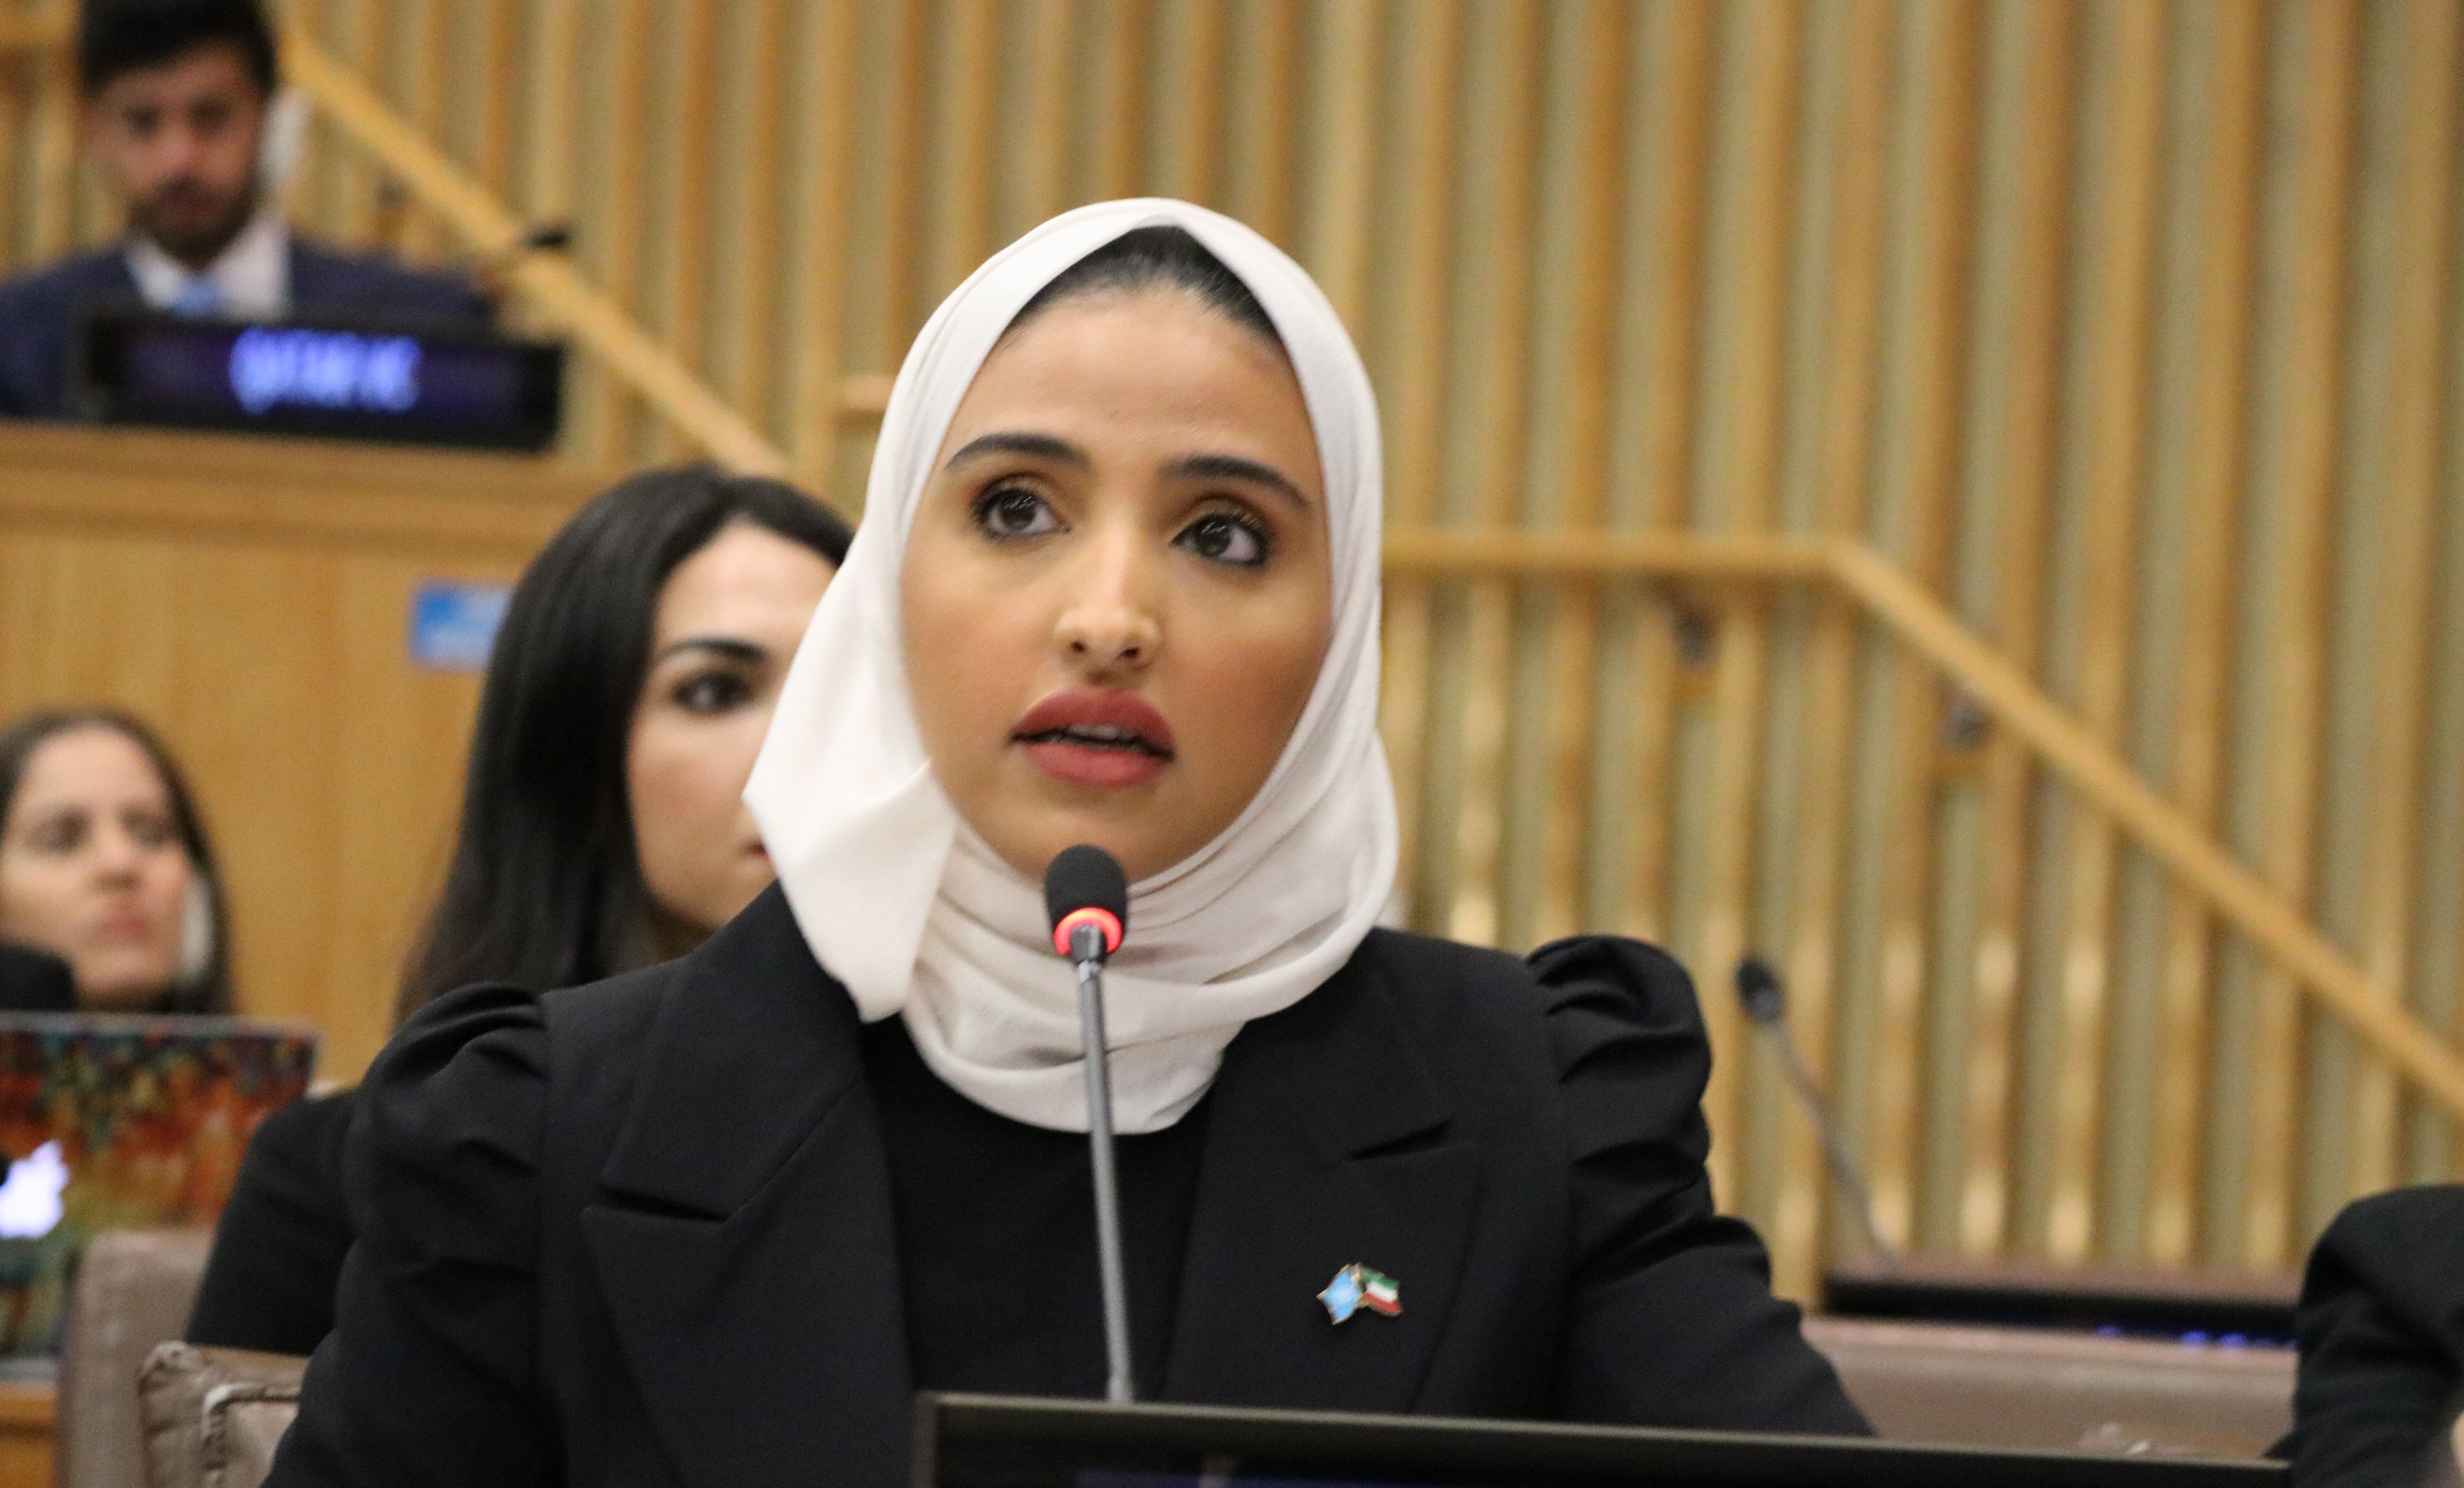 The diplomatic attache of the permanent mission at the UN, Mawaddah Al-Mansour